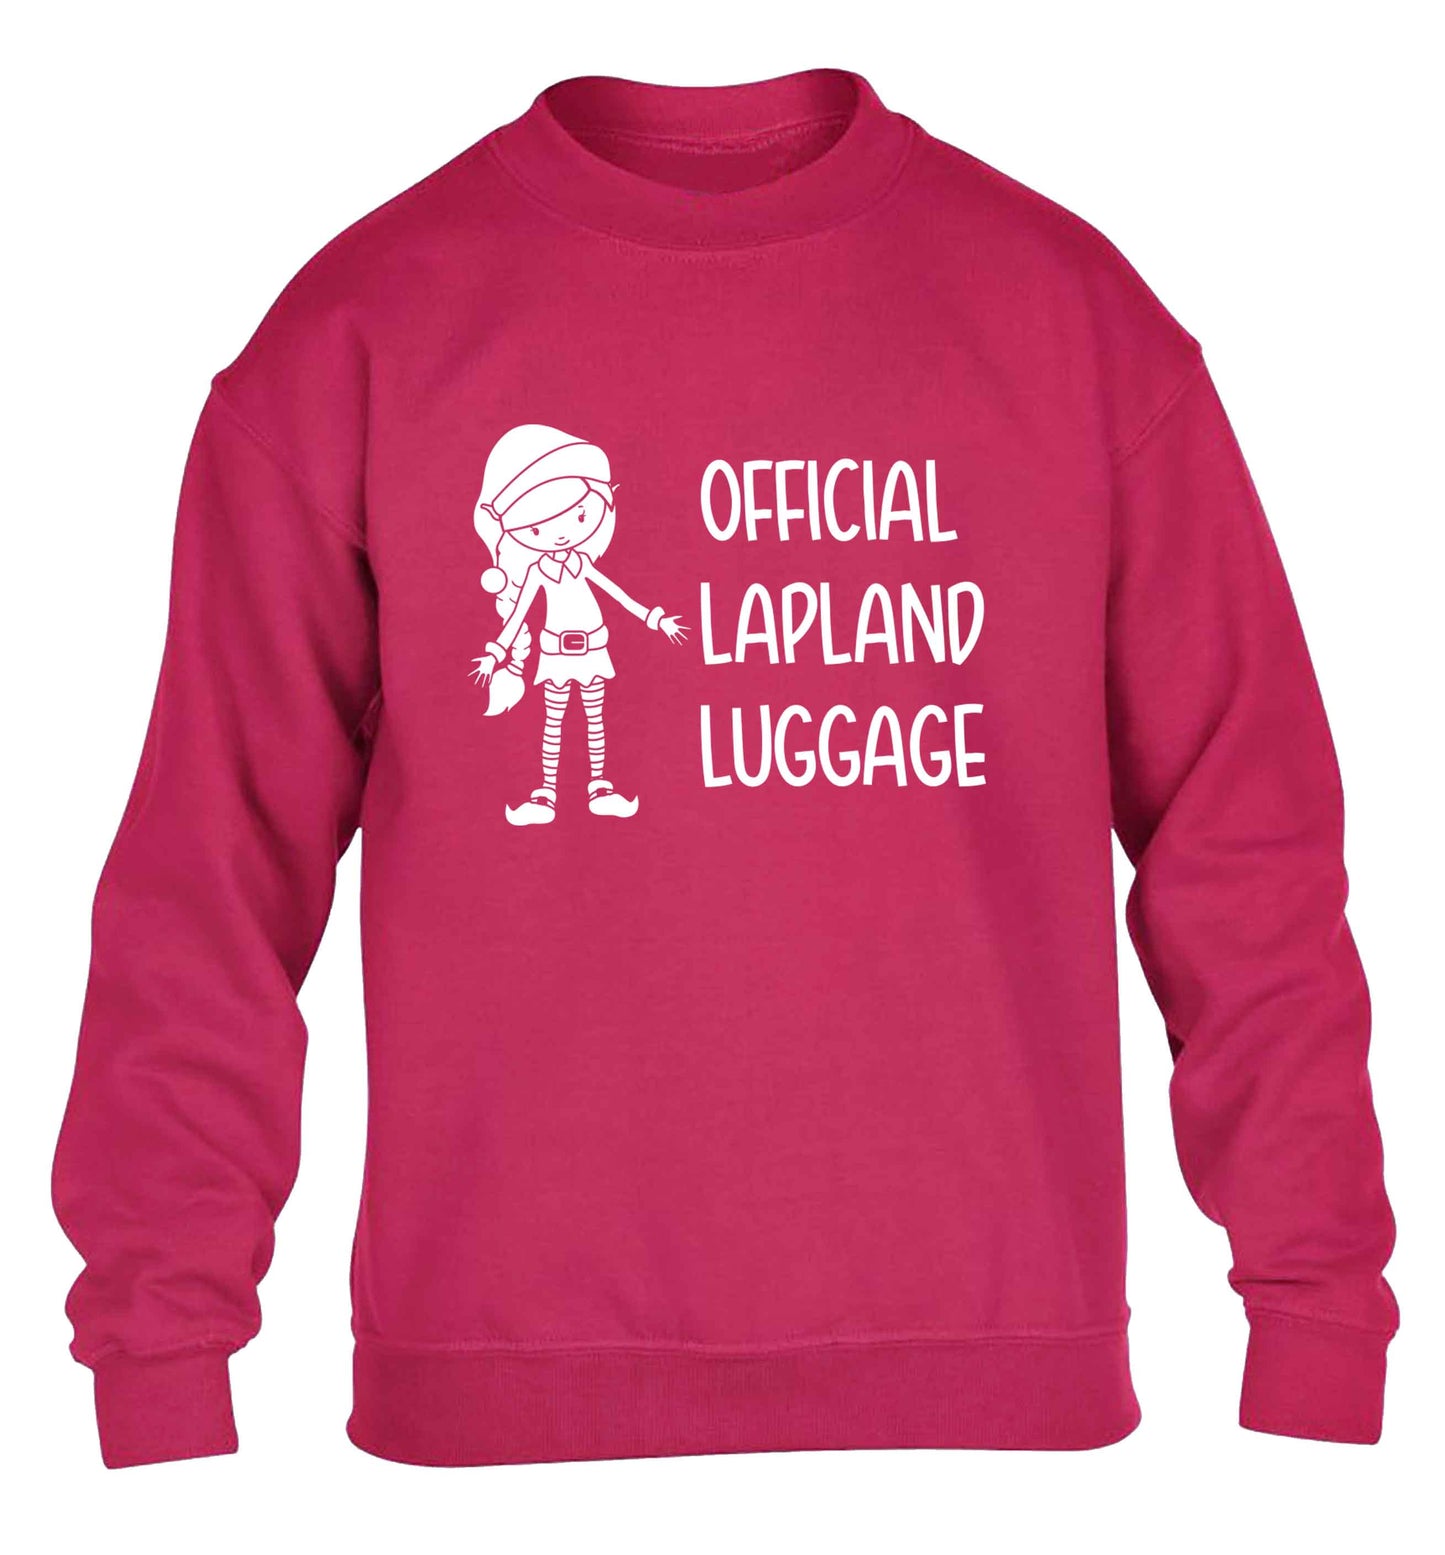 Official lapland luggage - Elf snowflake children's pink sweater 12-13 Years